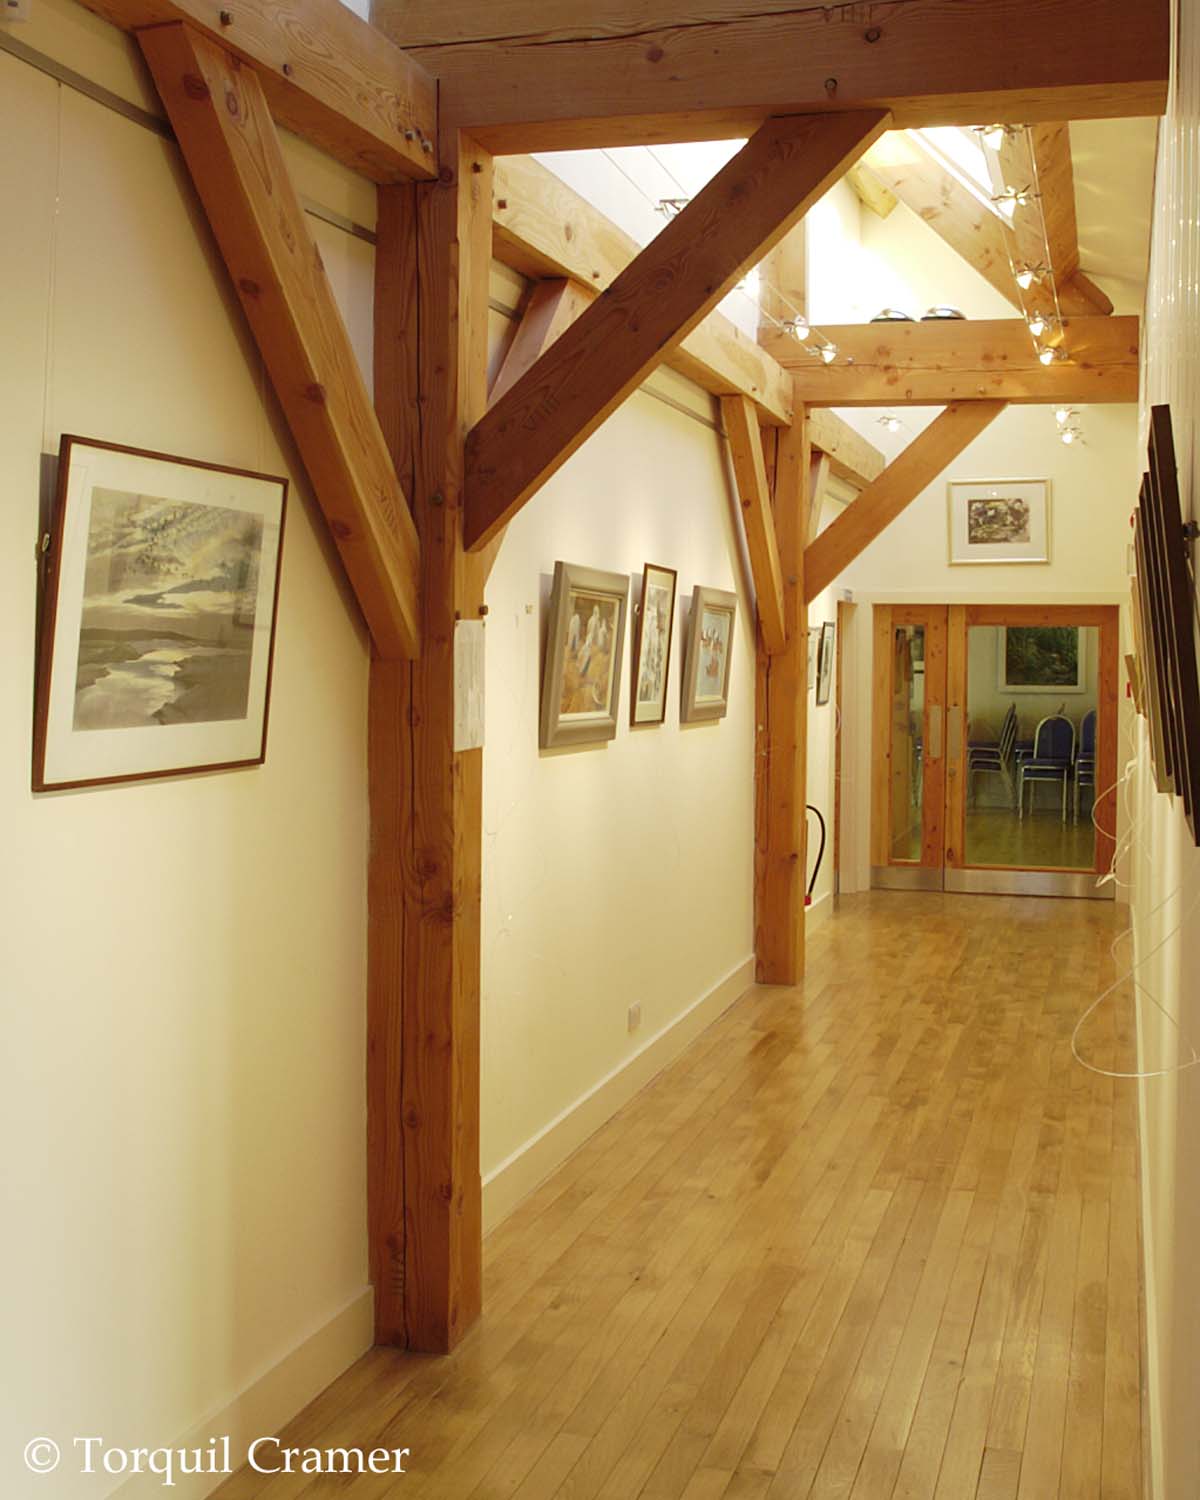 A hallway gallery with exposed wooden wall and roof beams. The flooring has a wood finish and white painted walls.